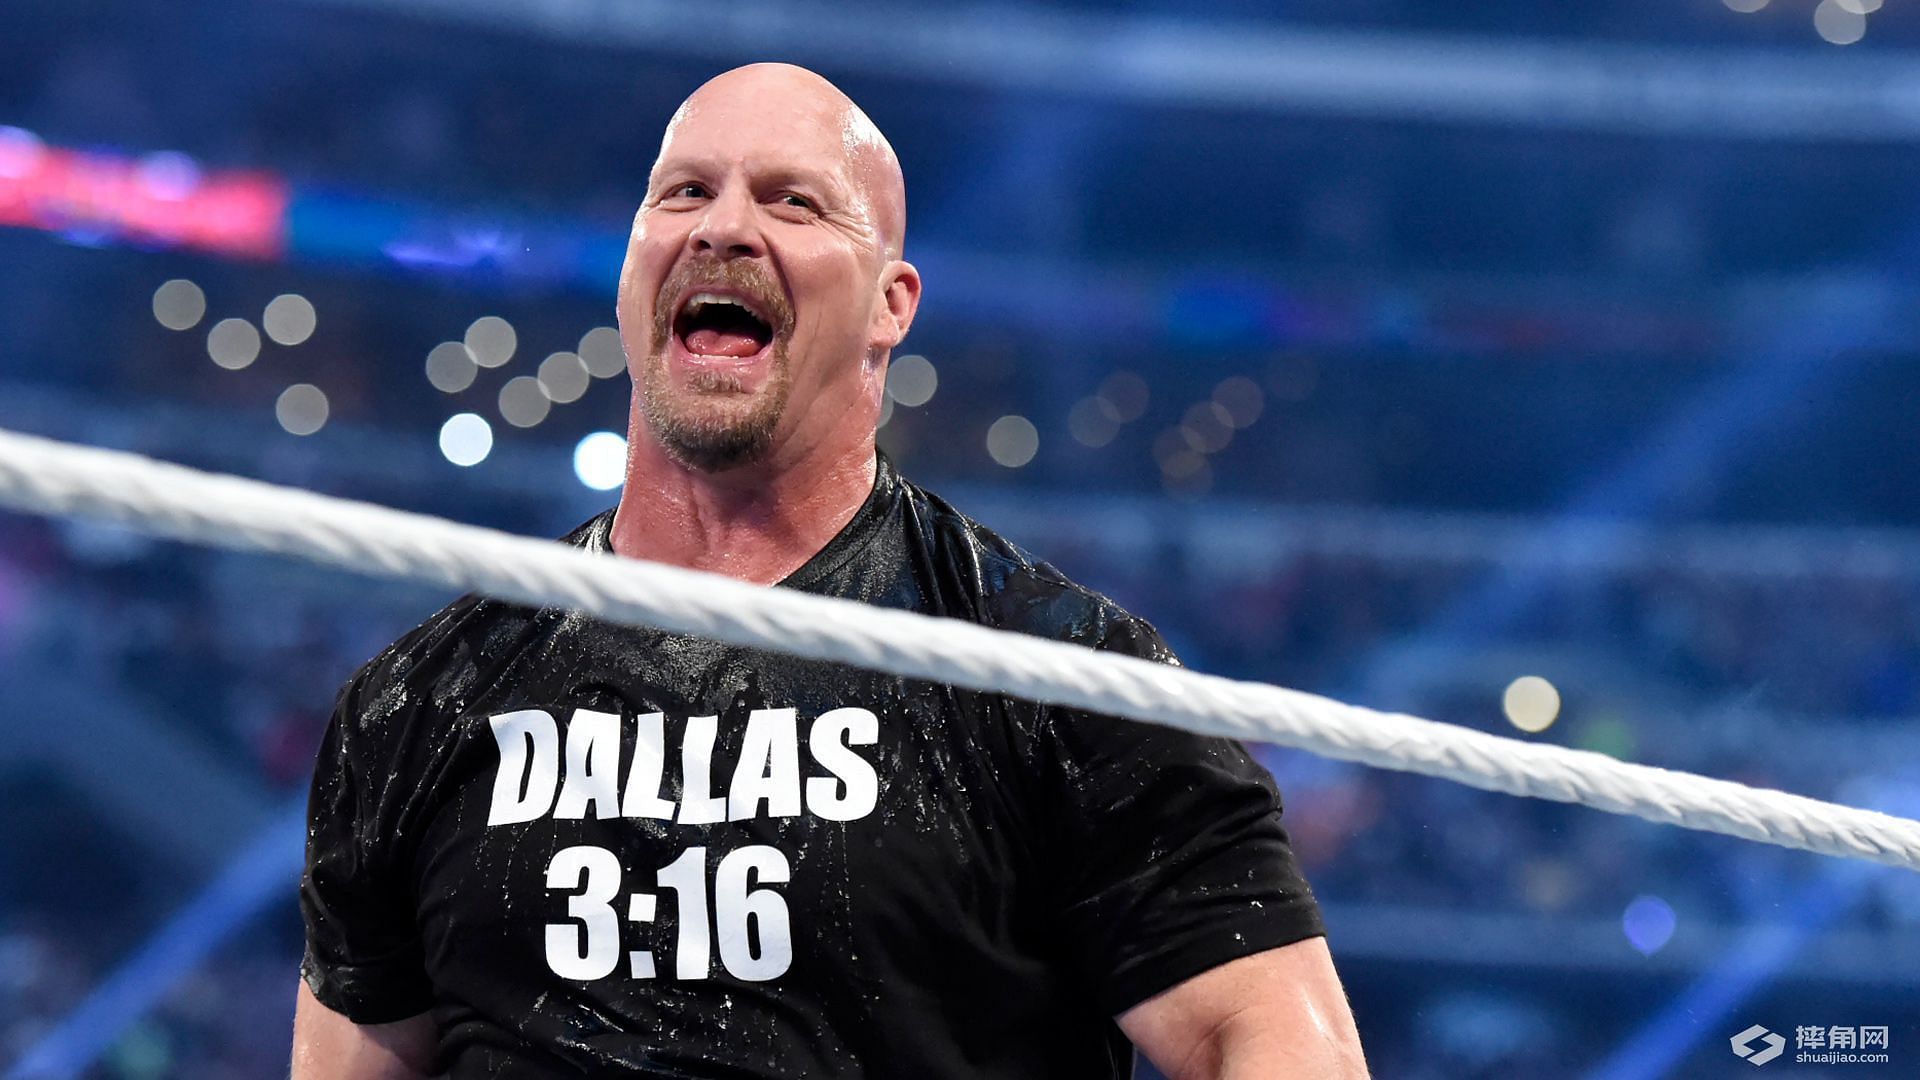 Stone Cold Steve Austin headlined WrestleMania after 19 years